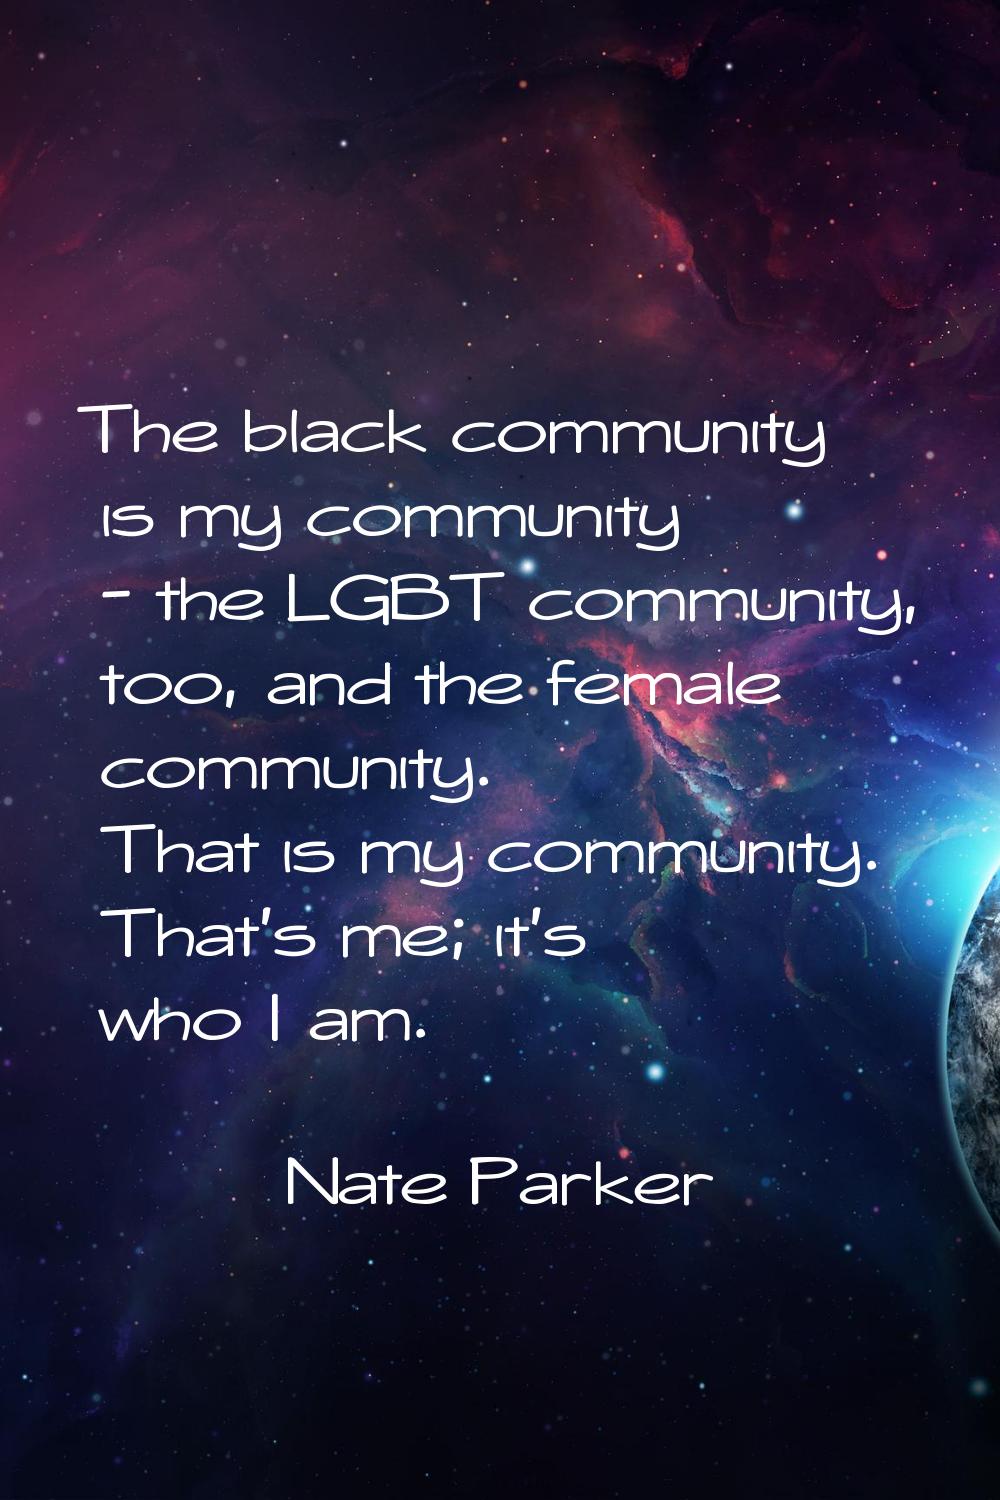 The black community is my community - the LGBT community, too, and the female community. That is my